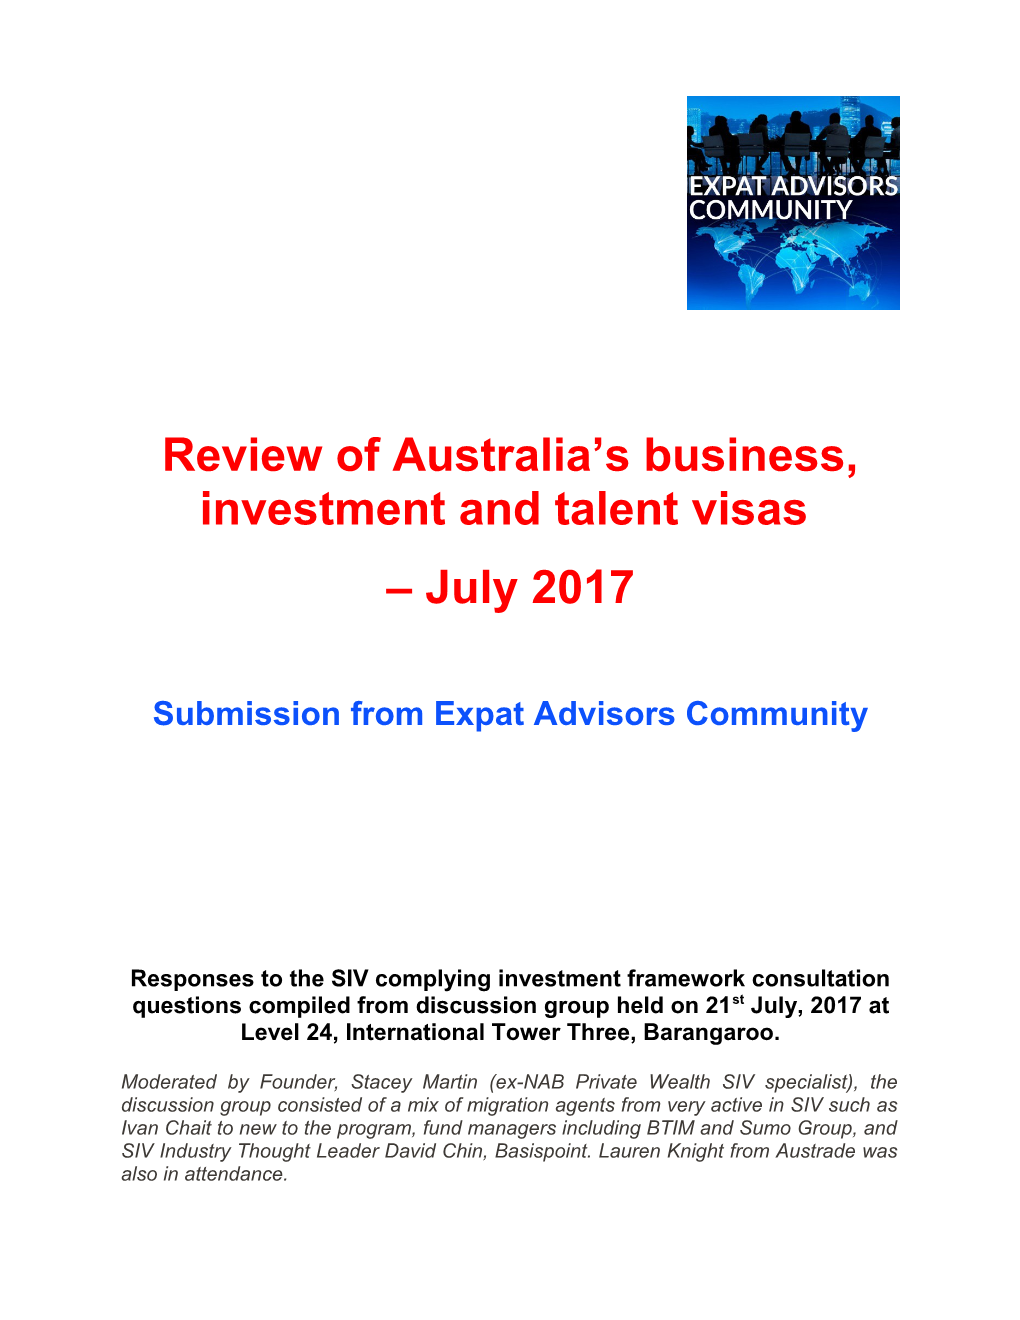 Review of Australia S Business, Investment and Talent Visas